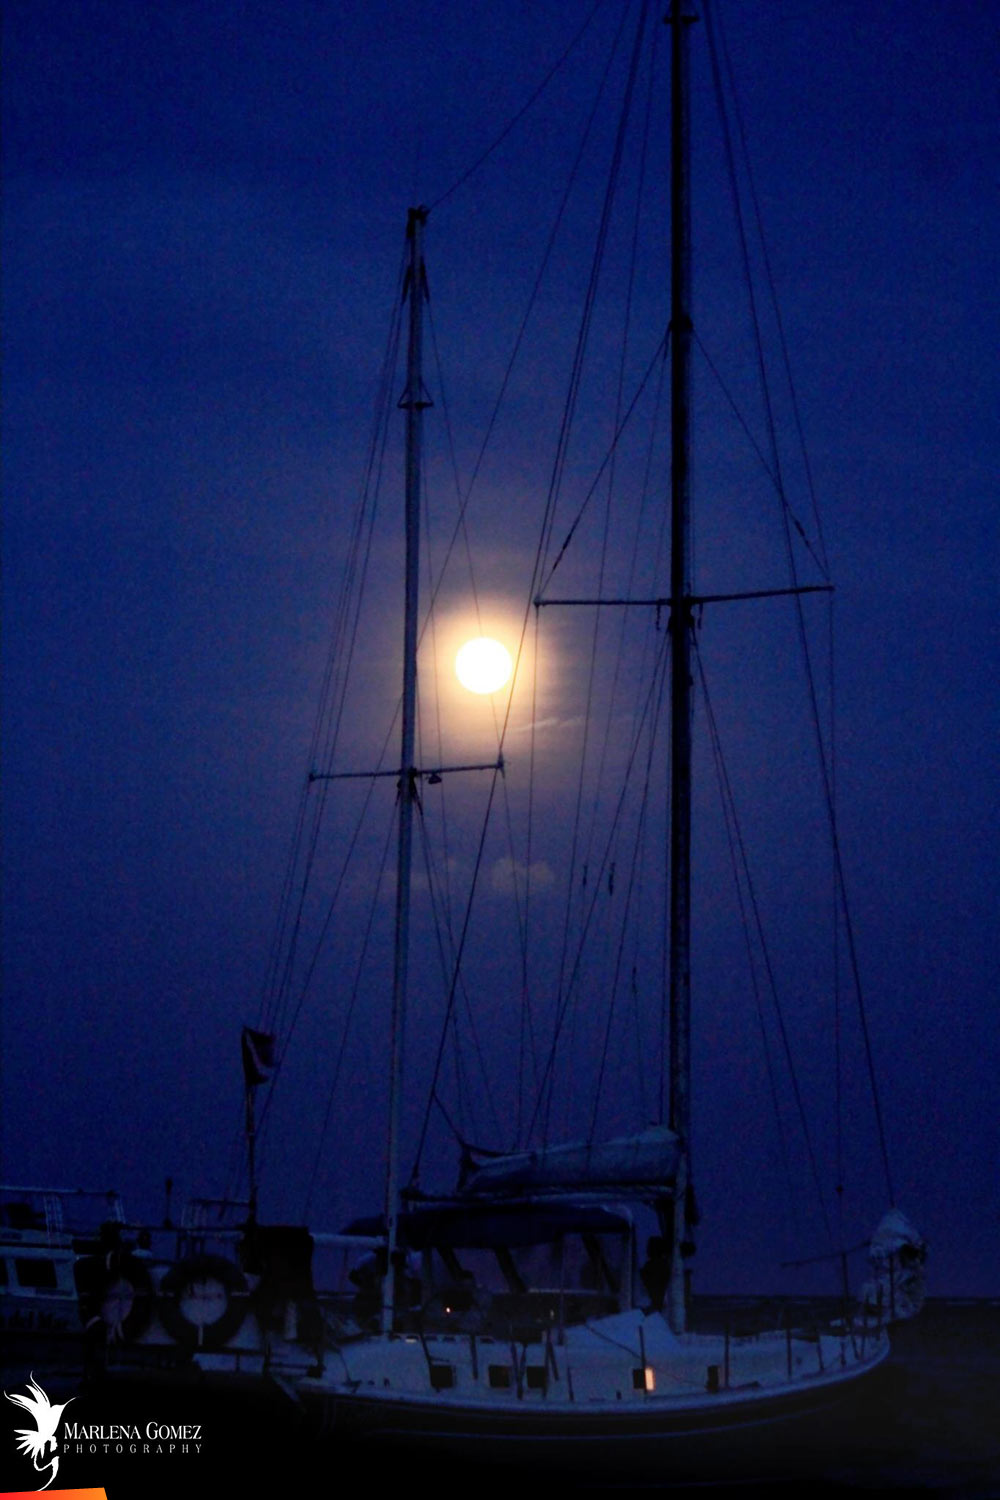 Sail Boat Silhouette by the Super Moon